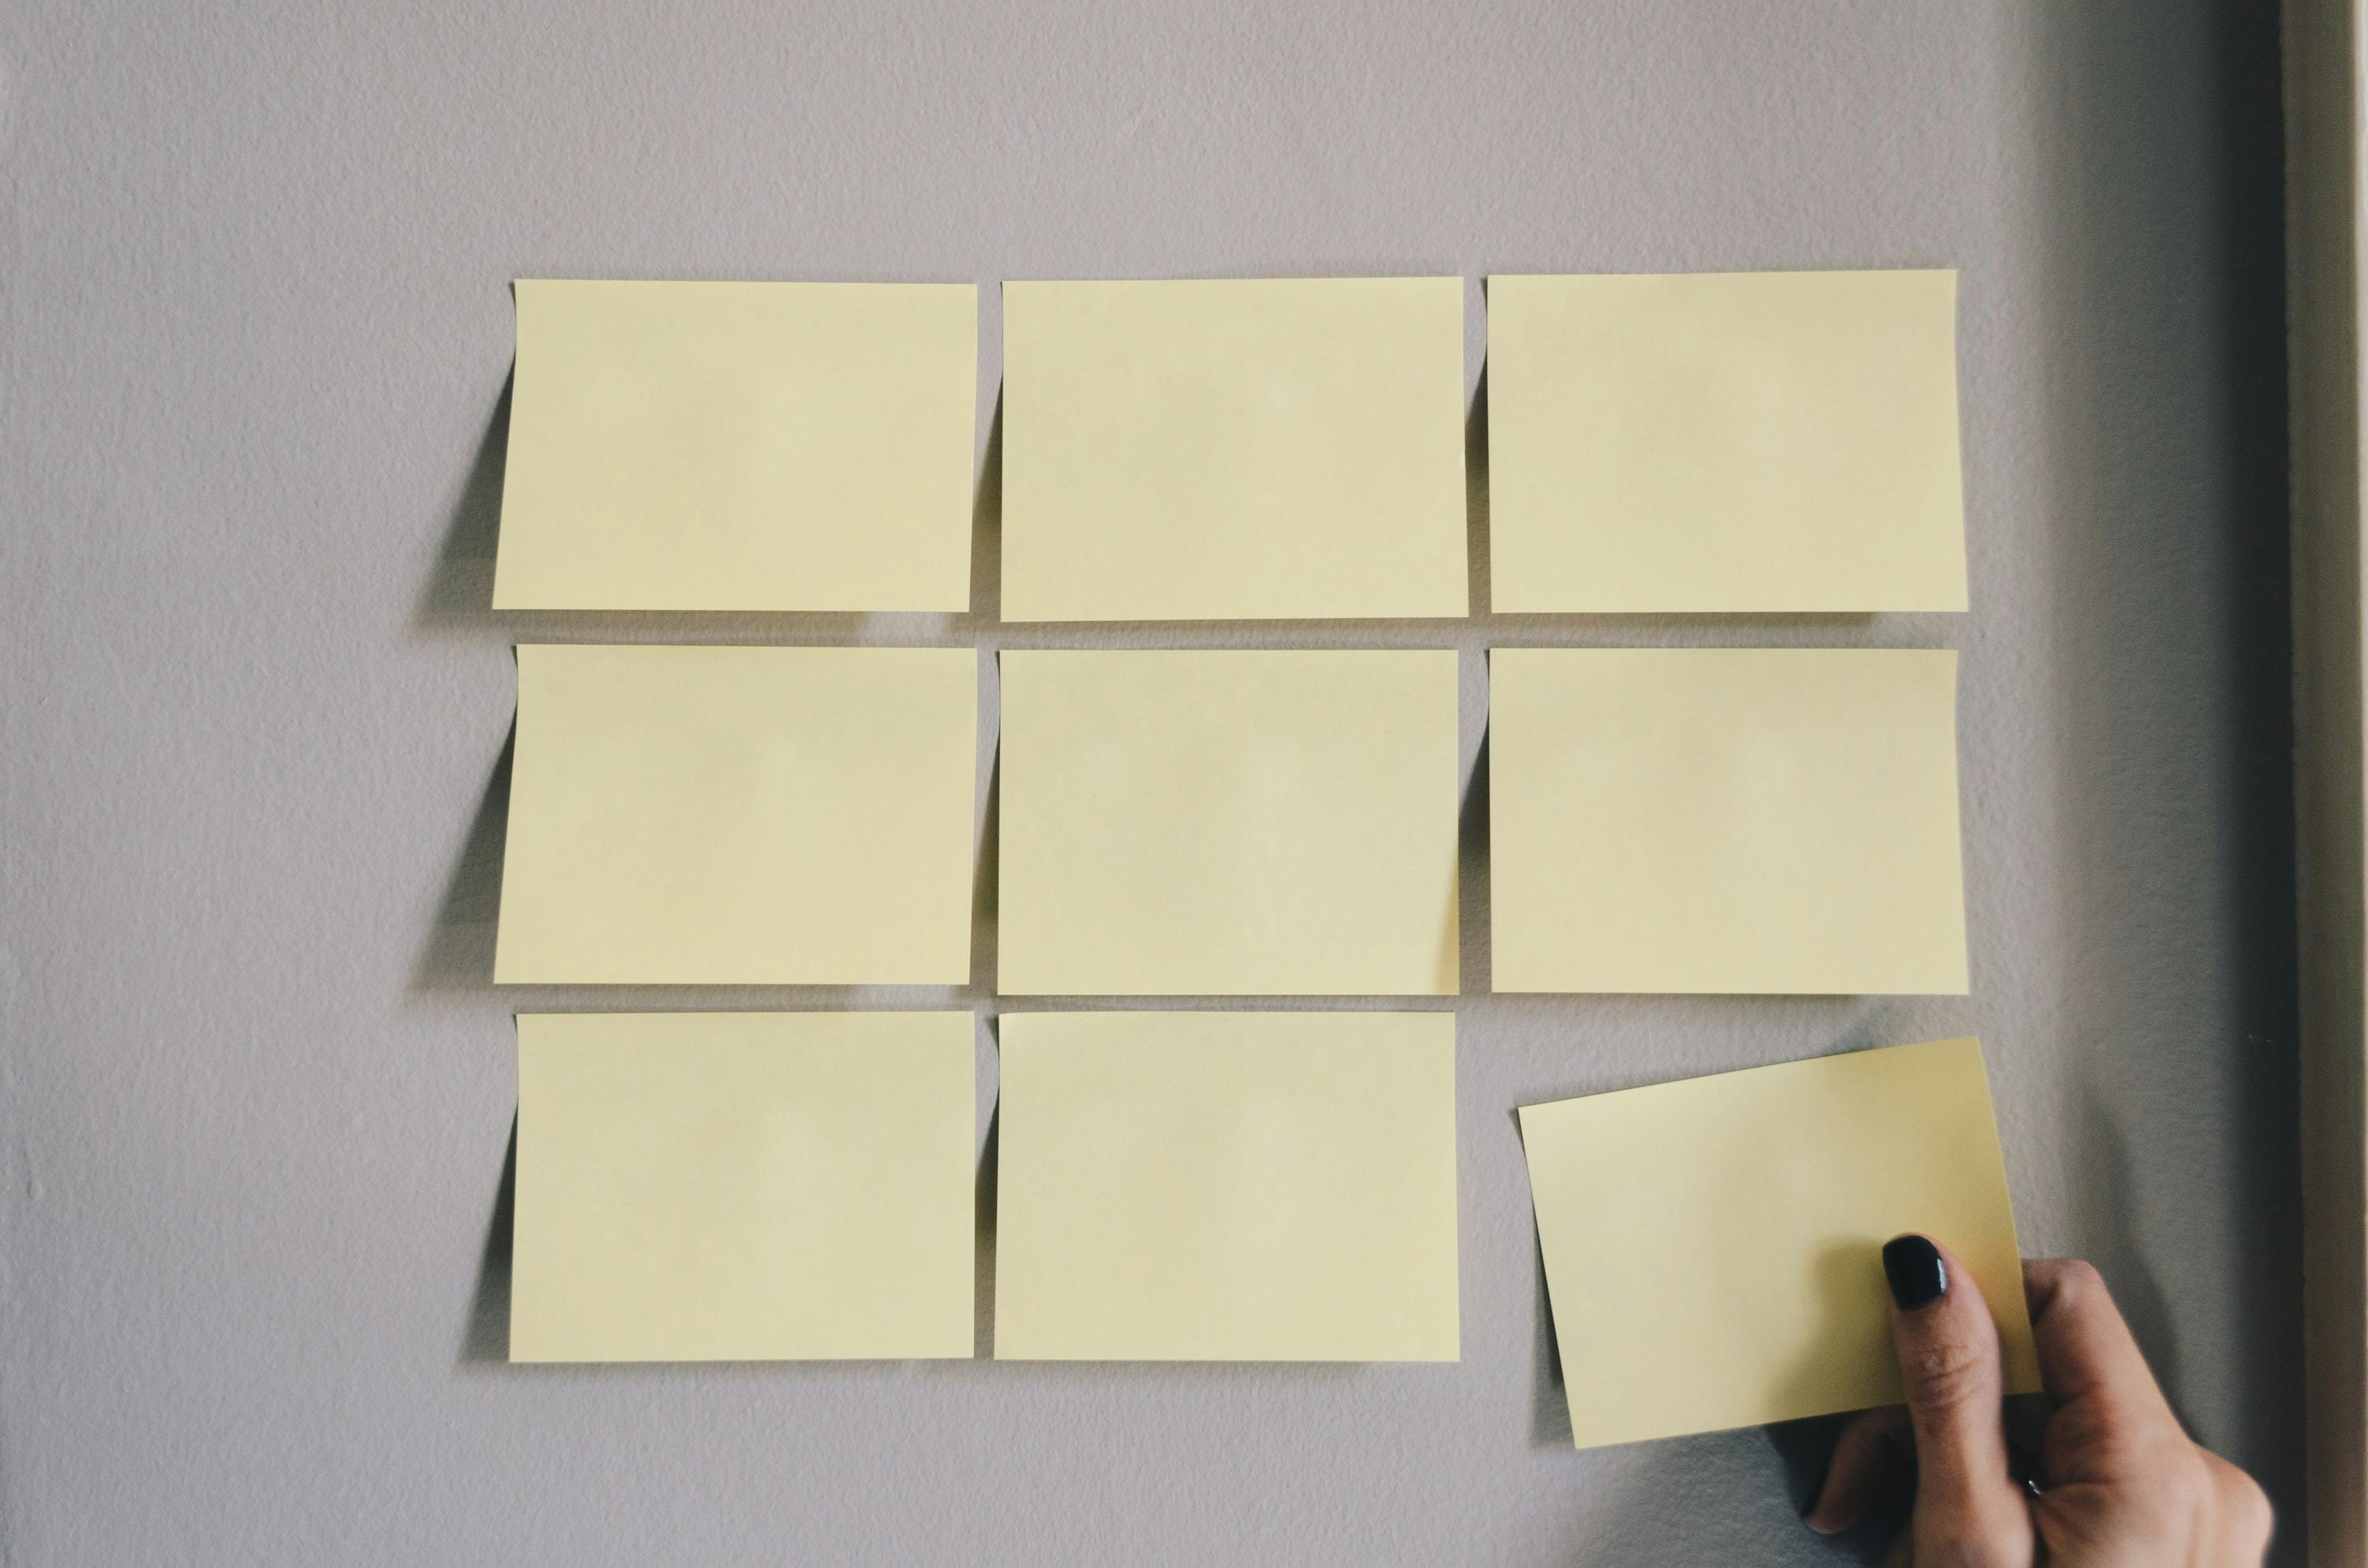 Blank post it notes arranged in a 3 by 3 grid